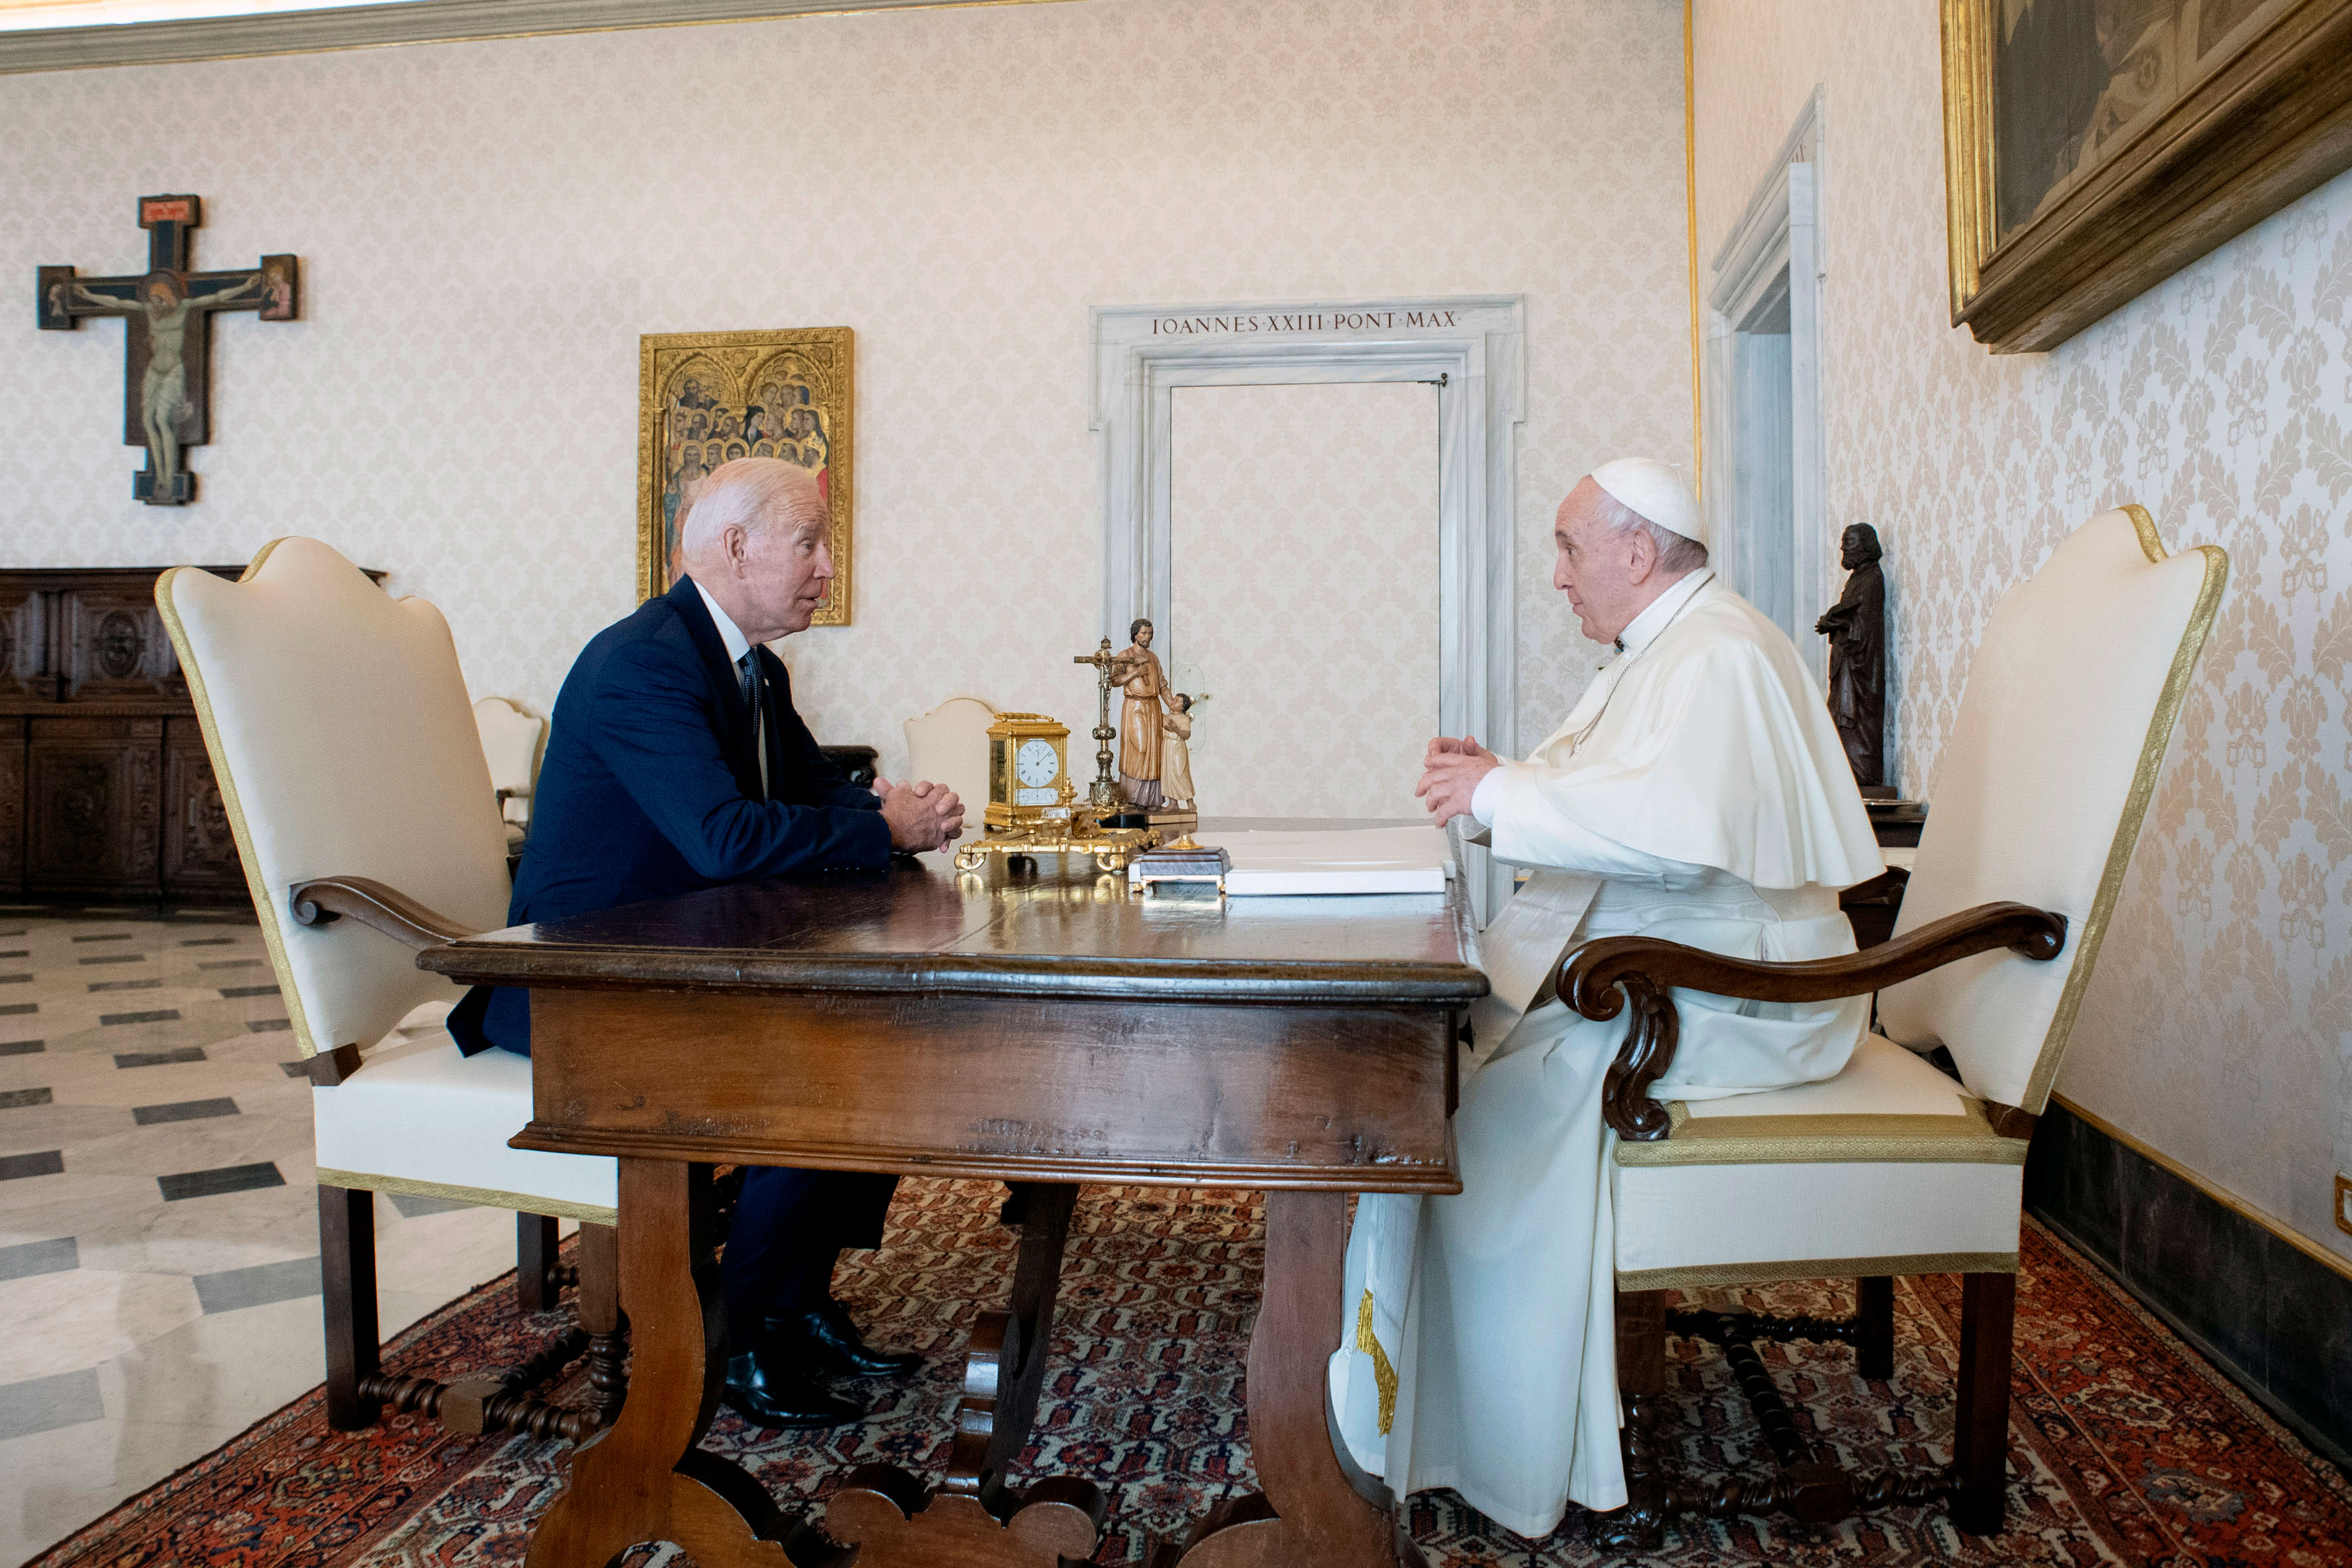 President Joe Biden speaks with Pope Francis as they meet at the Vatican on October 29.